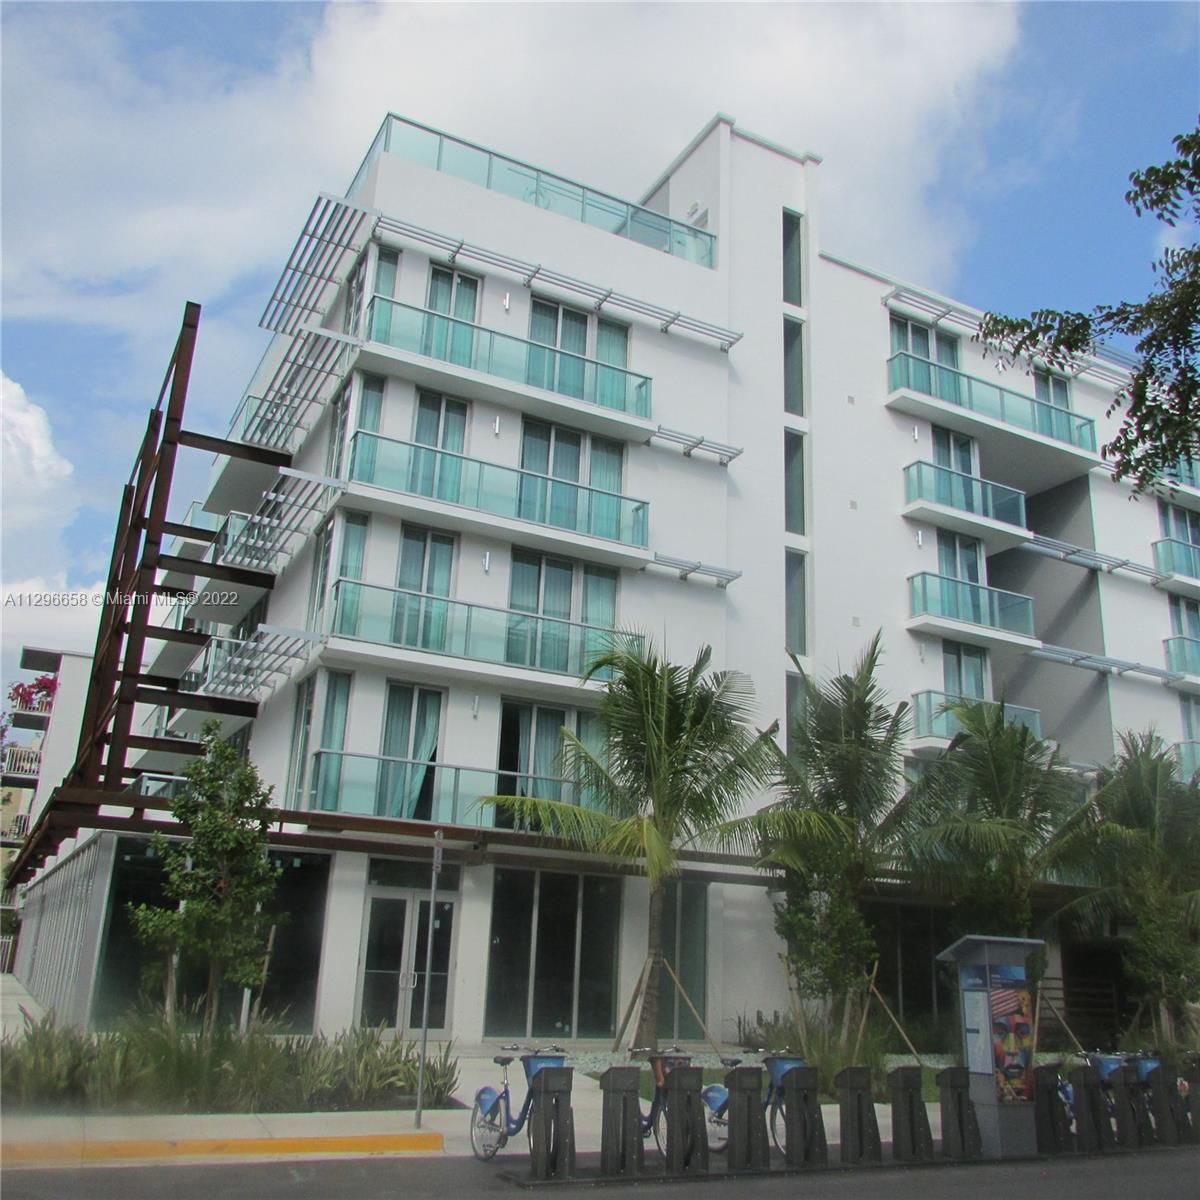 Trendy South Beach Condo Hotel! Offered fully furnished. For the sophisticated buyer that appreciates a full-service condo with pool! Walking distance to the best South Beach has to offer.